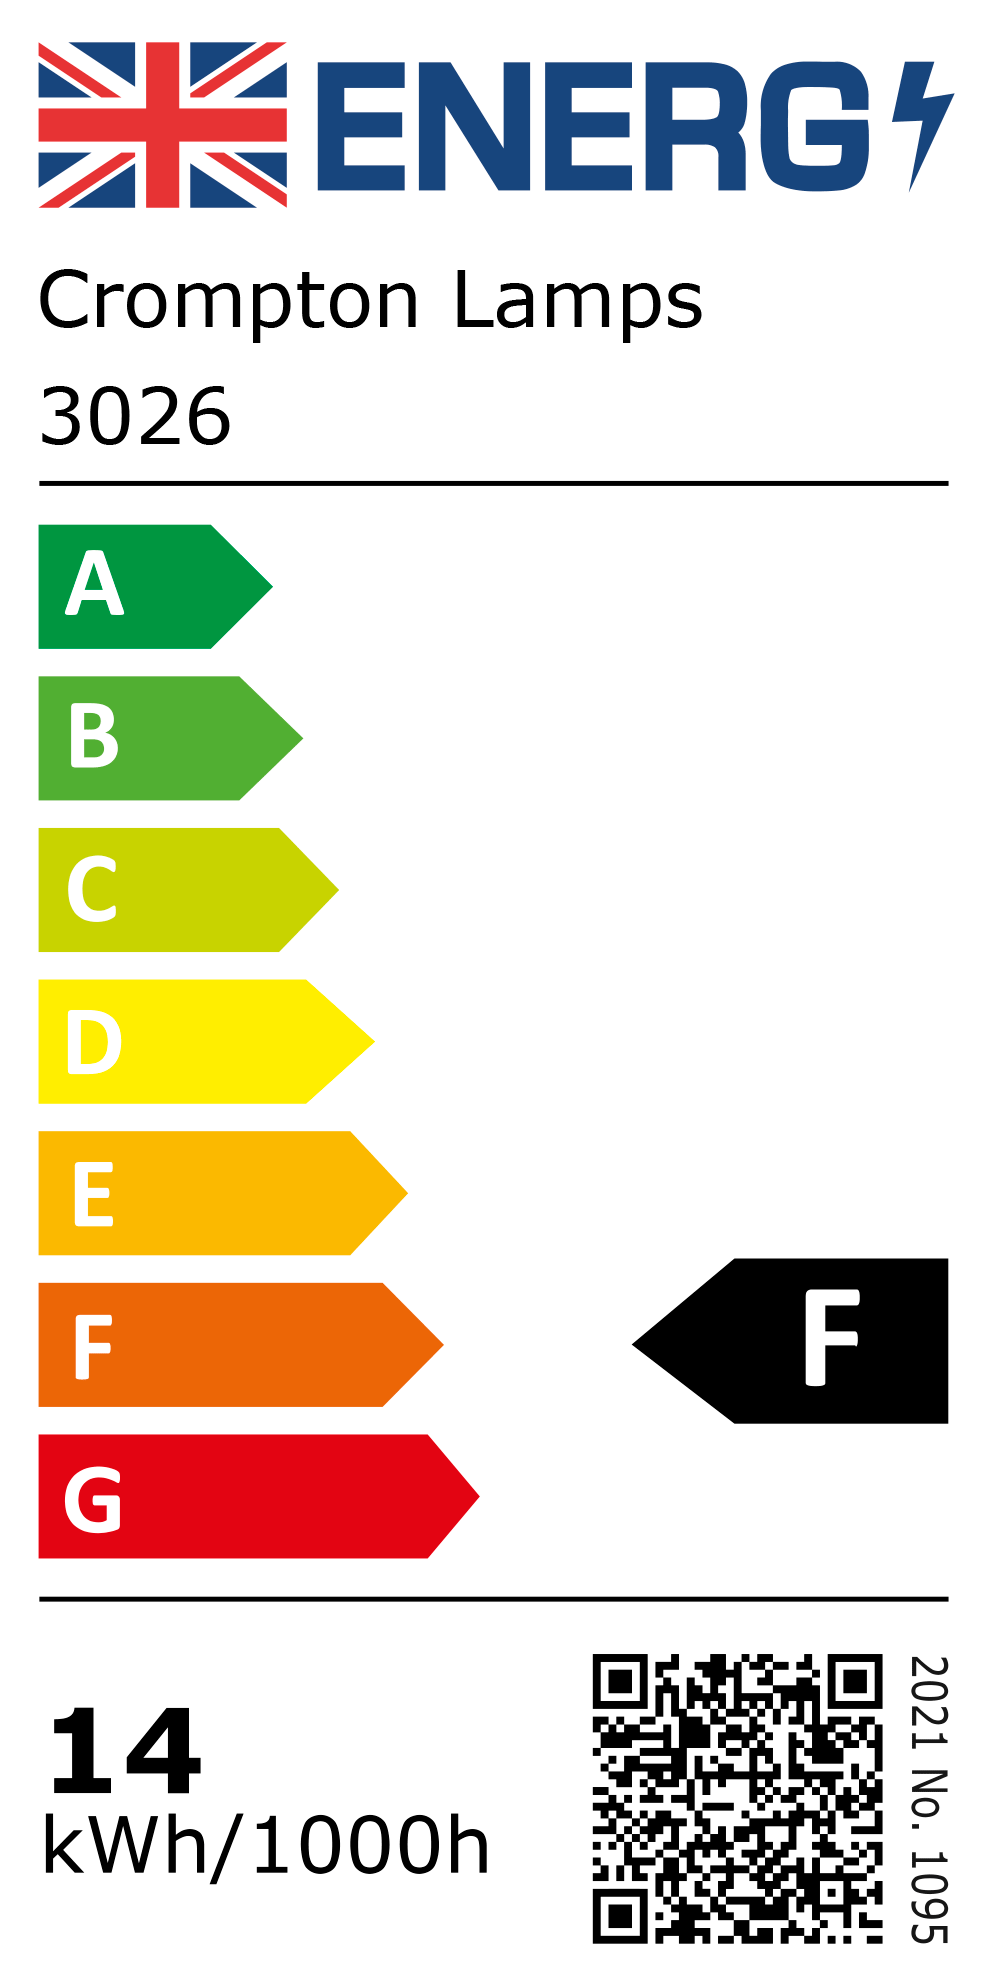 New 2021 Energy Rating Label: Stock Code 3026